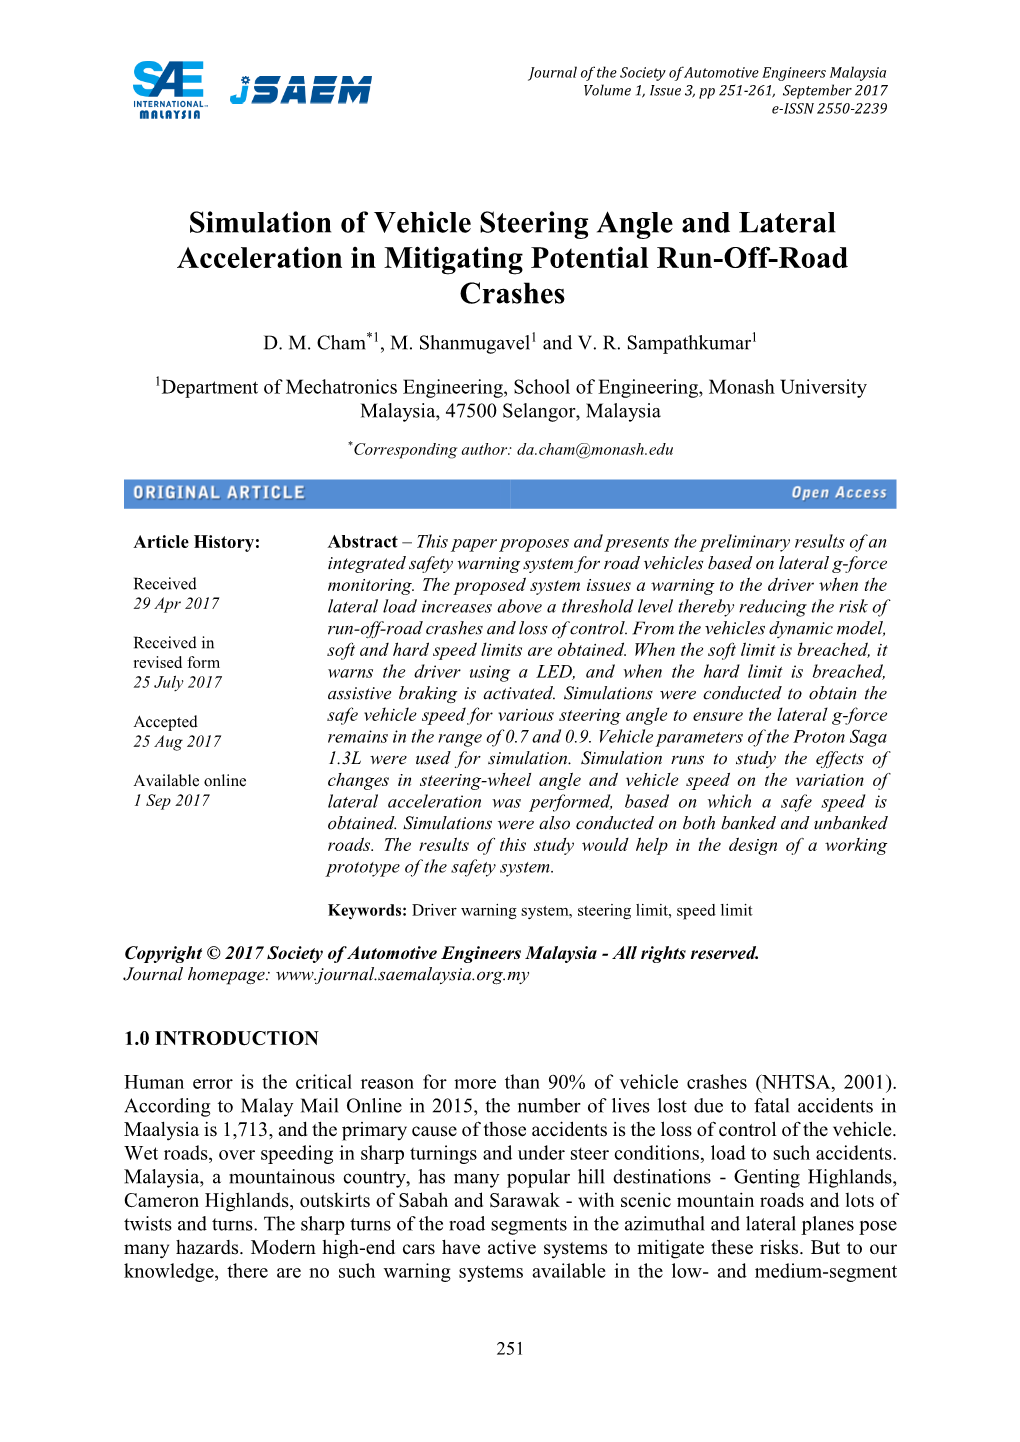 Simulation of Vehicle Steering Angle and Lateral Acceleration in Mitigating Potential Run-Off-Road Crashes